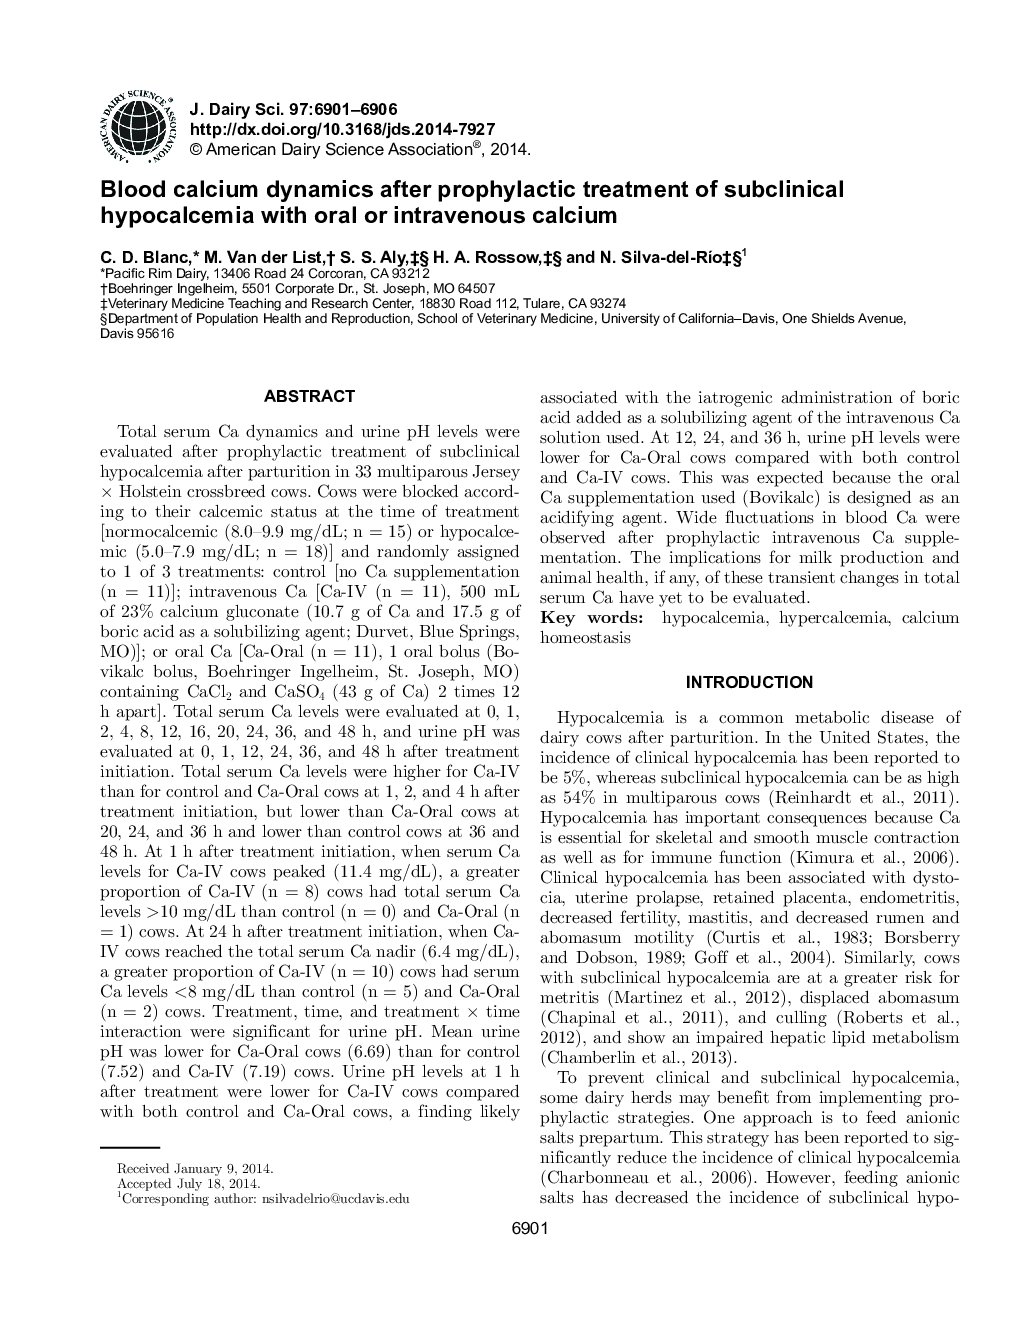 Blood calcium dynamics after prophylactic treatment of subclinical hypocalcemia with oral or intravenous calcium